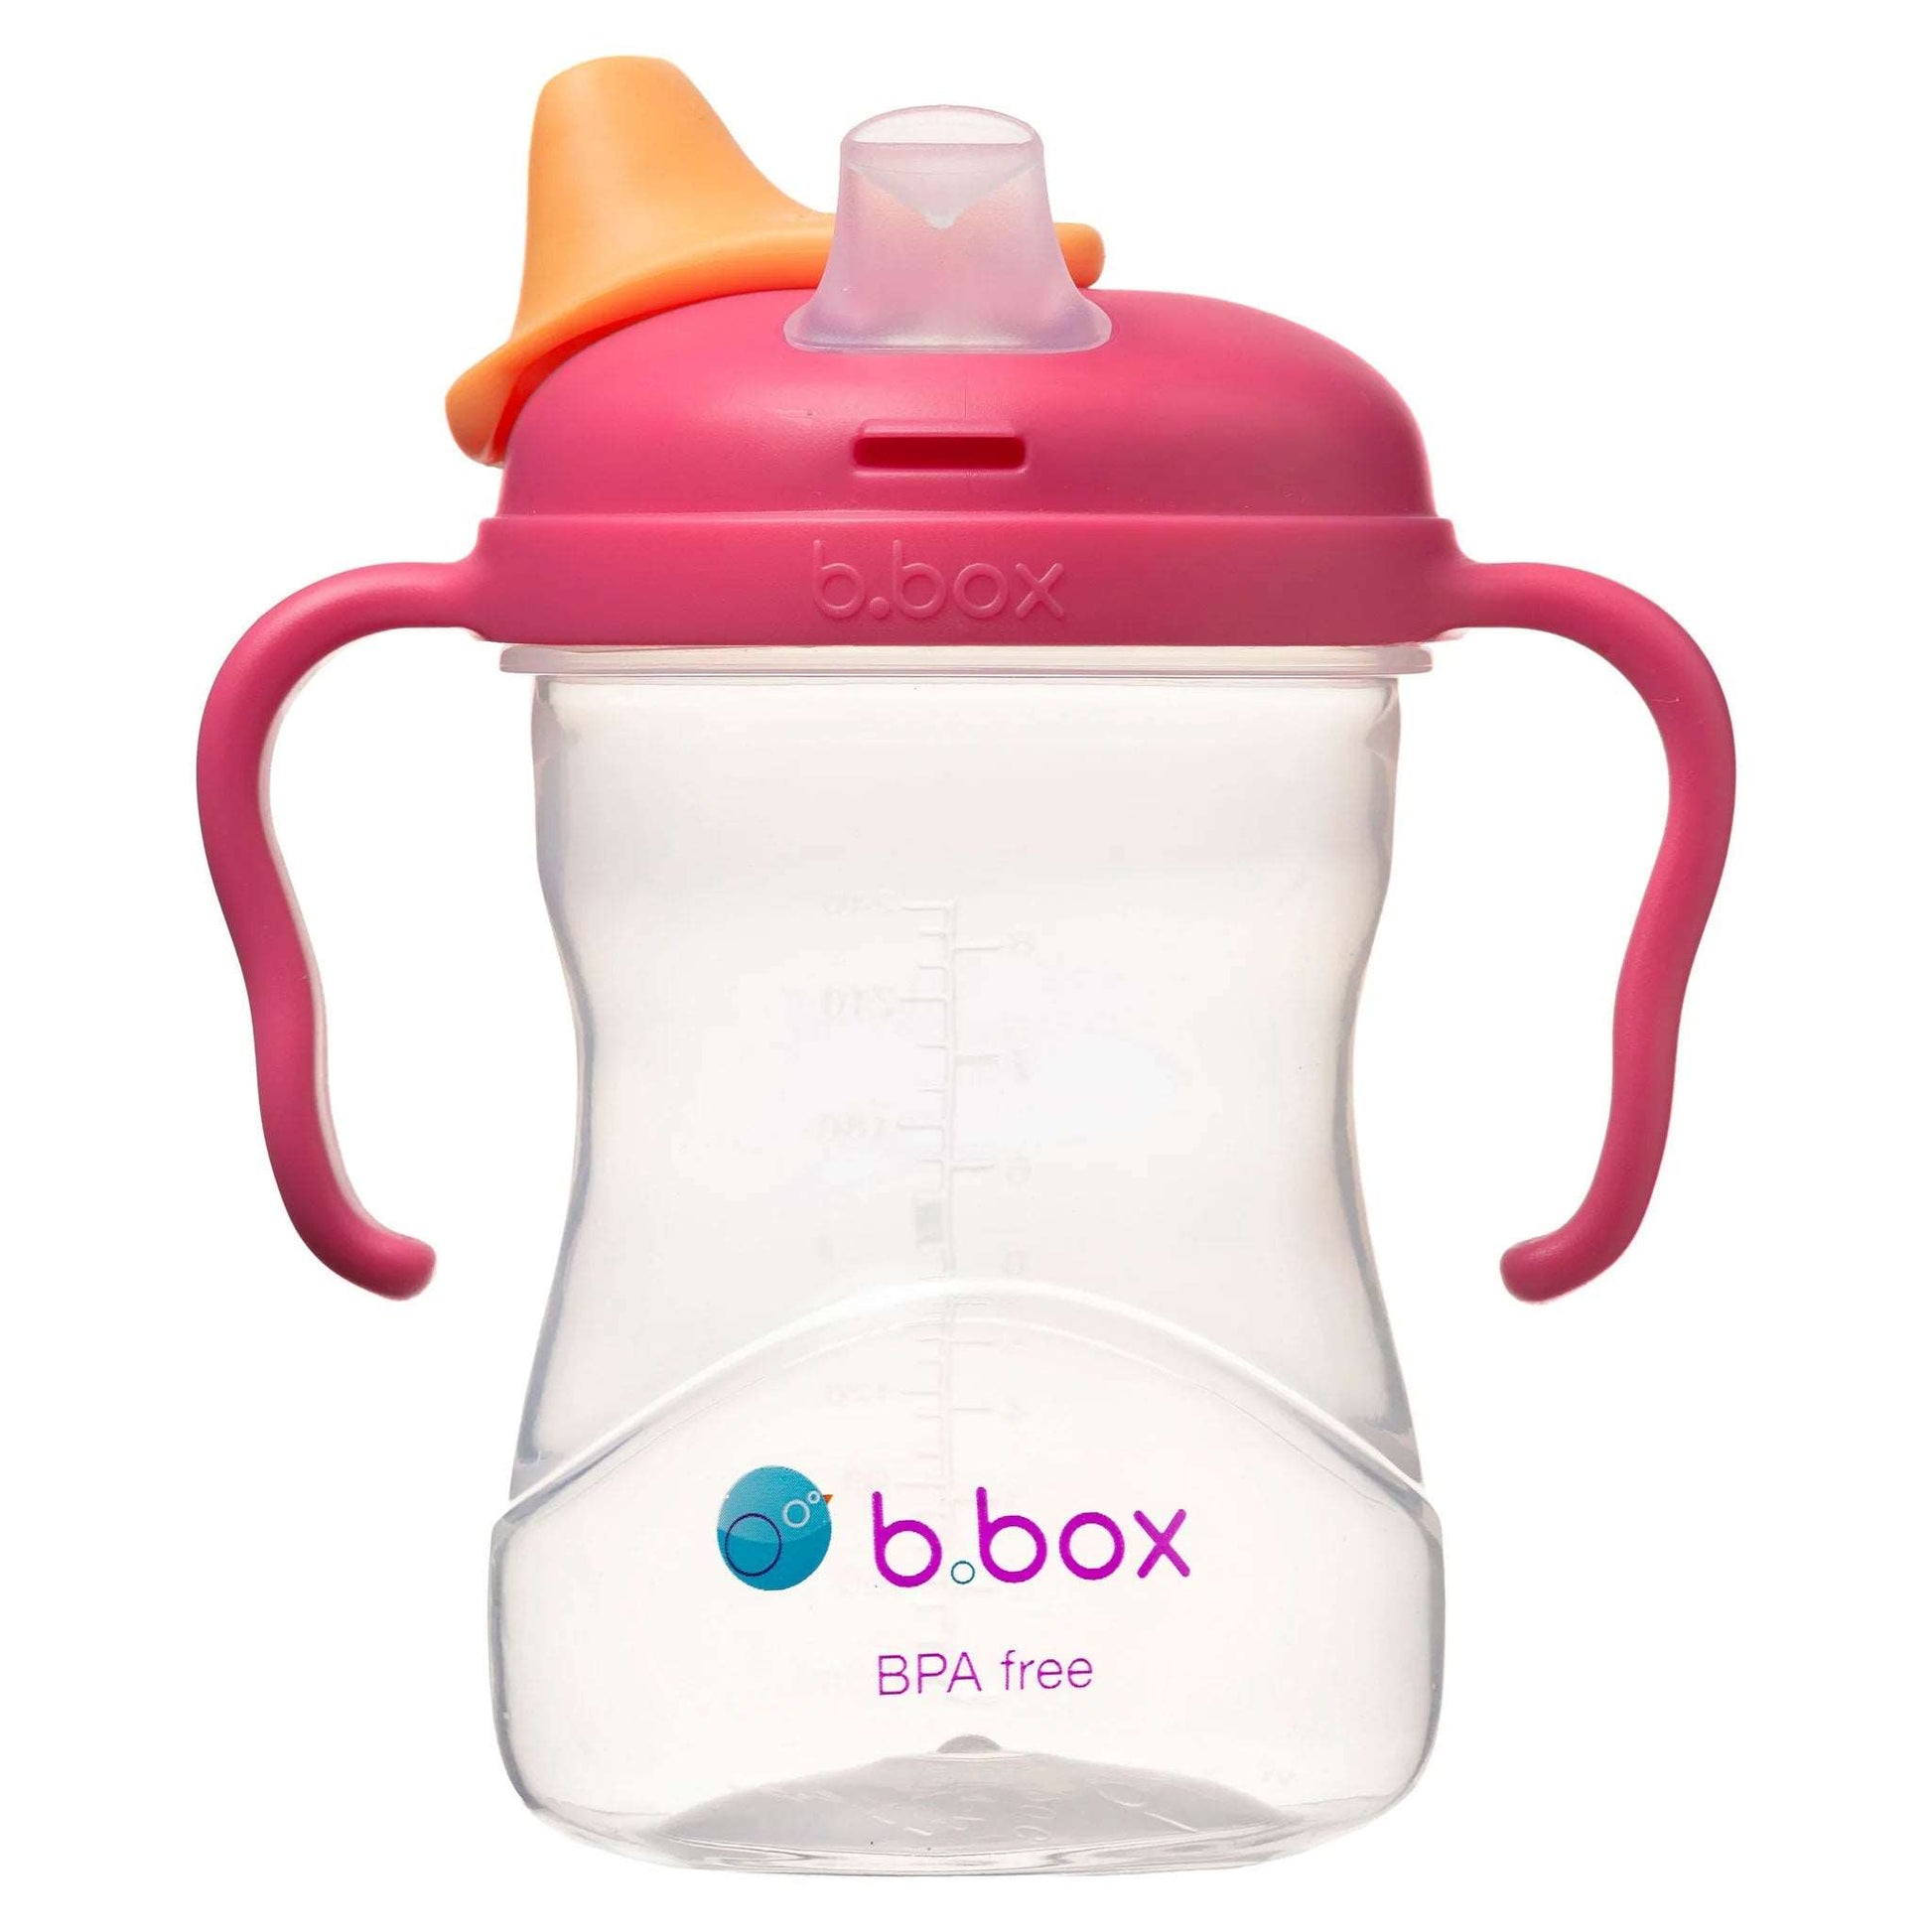 The b.box Spout Cup is a training cup that is the ideal way for kids to learn to drink from a cup. The training cup mimics the flow of a big kids cup, by funnelling liquids into the rim for easy free-flow drinking.